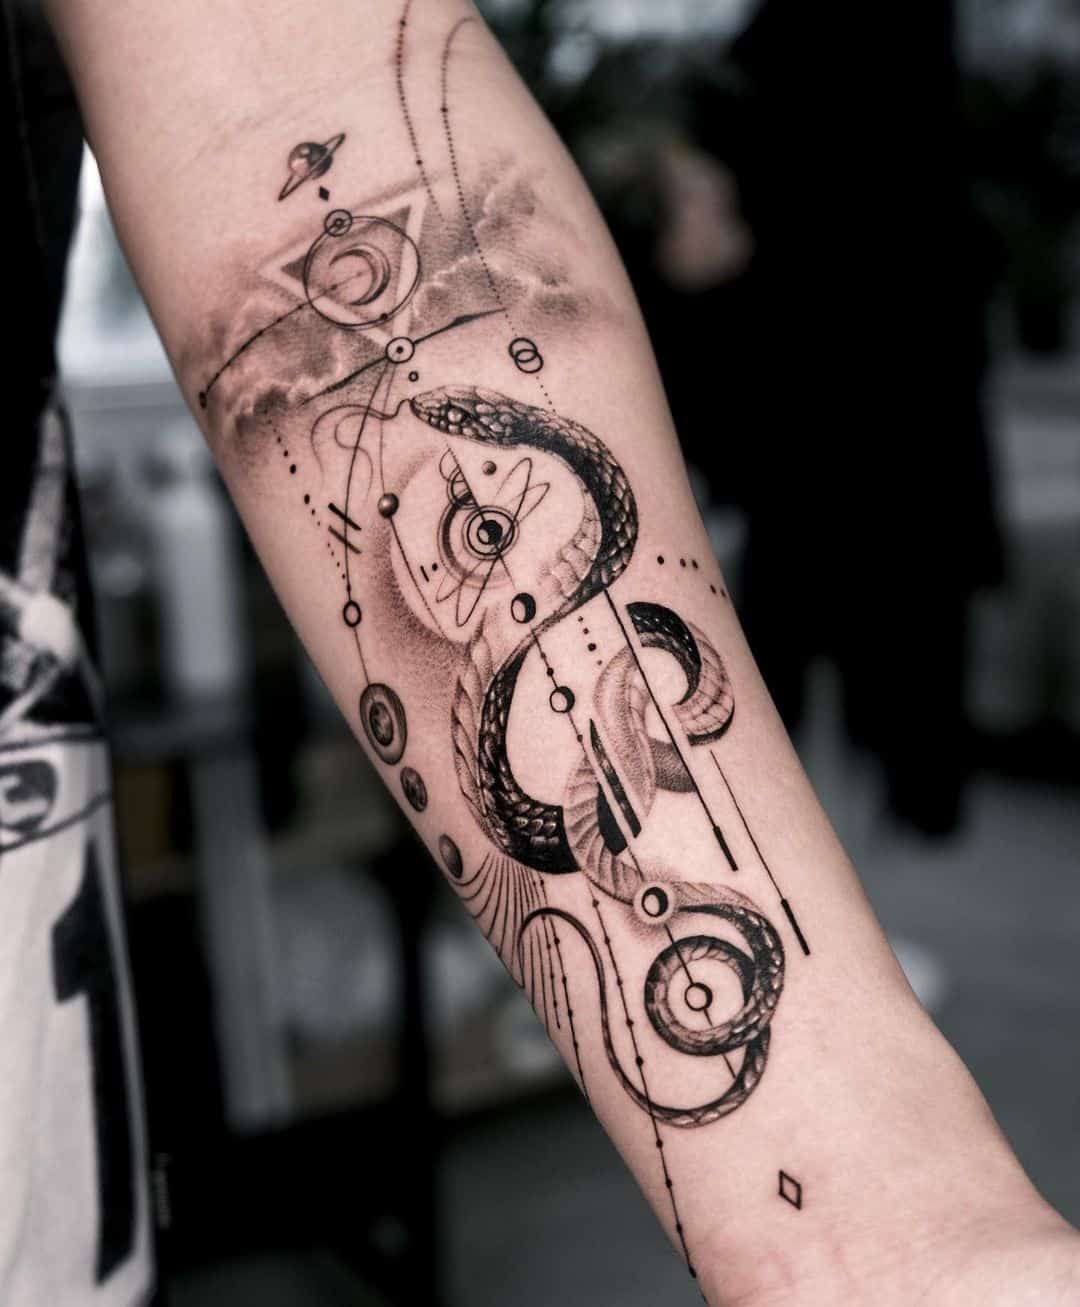 Realistic forearm tattoo by even gmt.ink